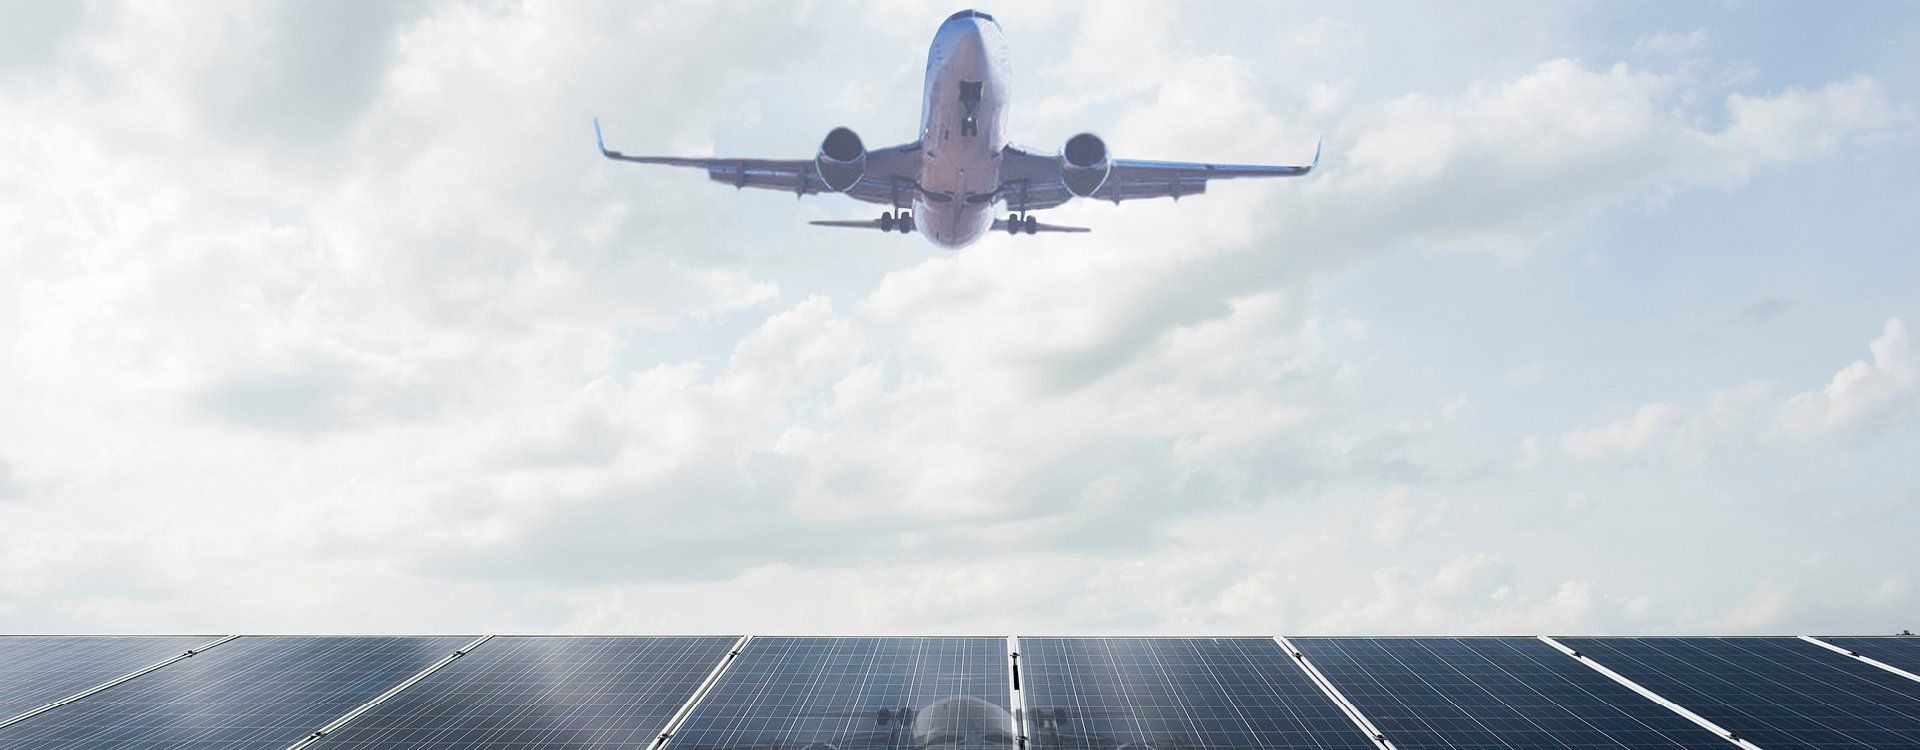 Airplane in flight and view of solar panels in the background | WSP